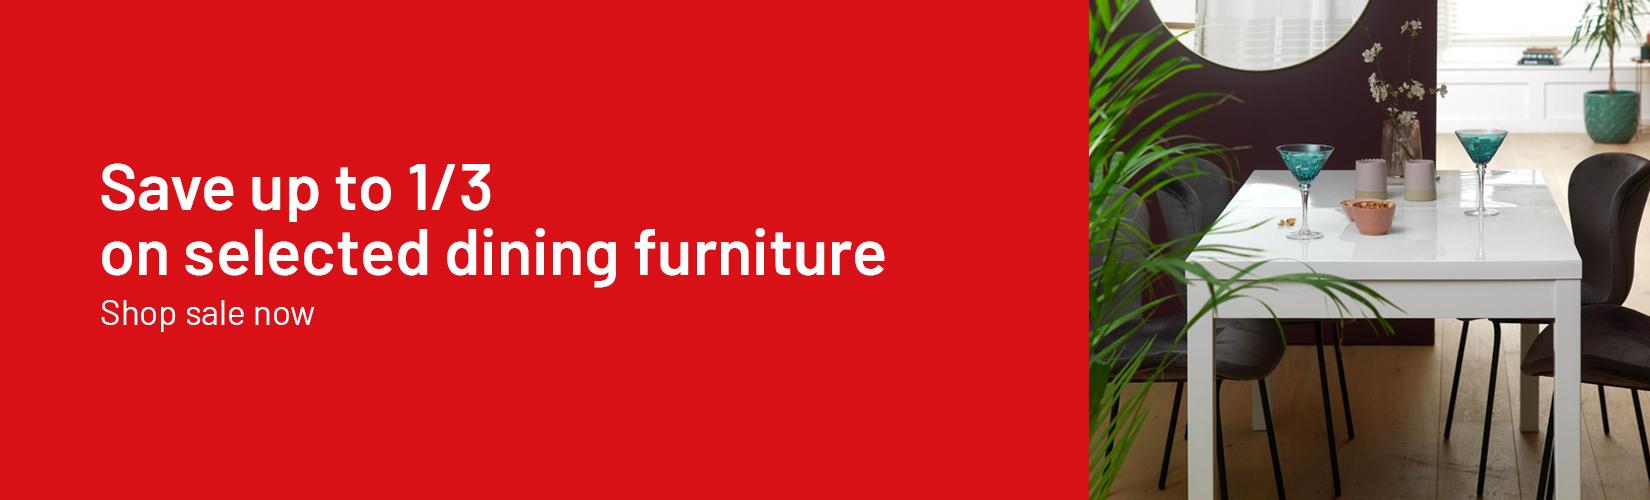 Save up to 1/3 on selected dining furniture. Shop sale now.